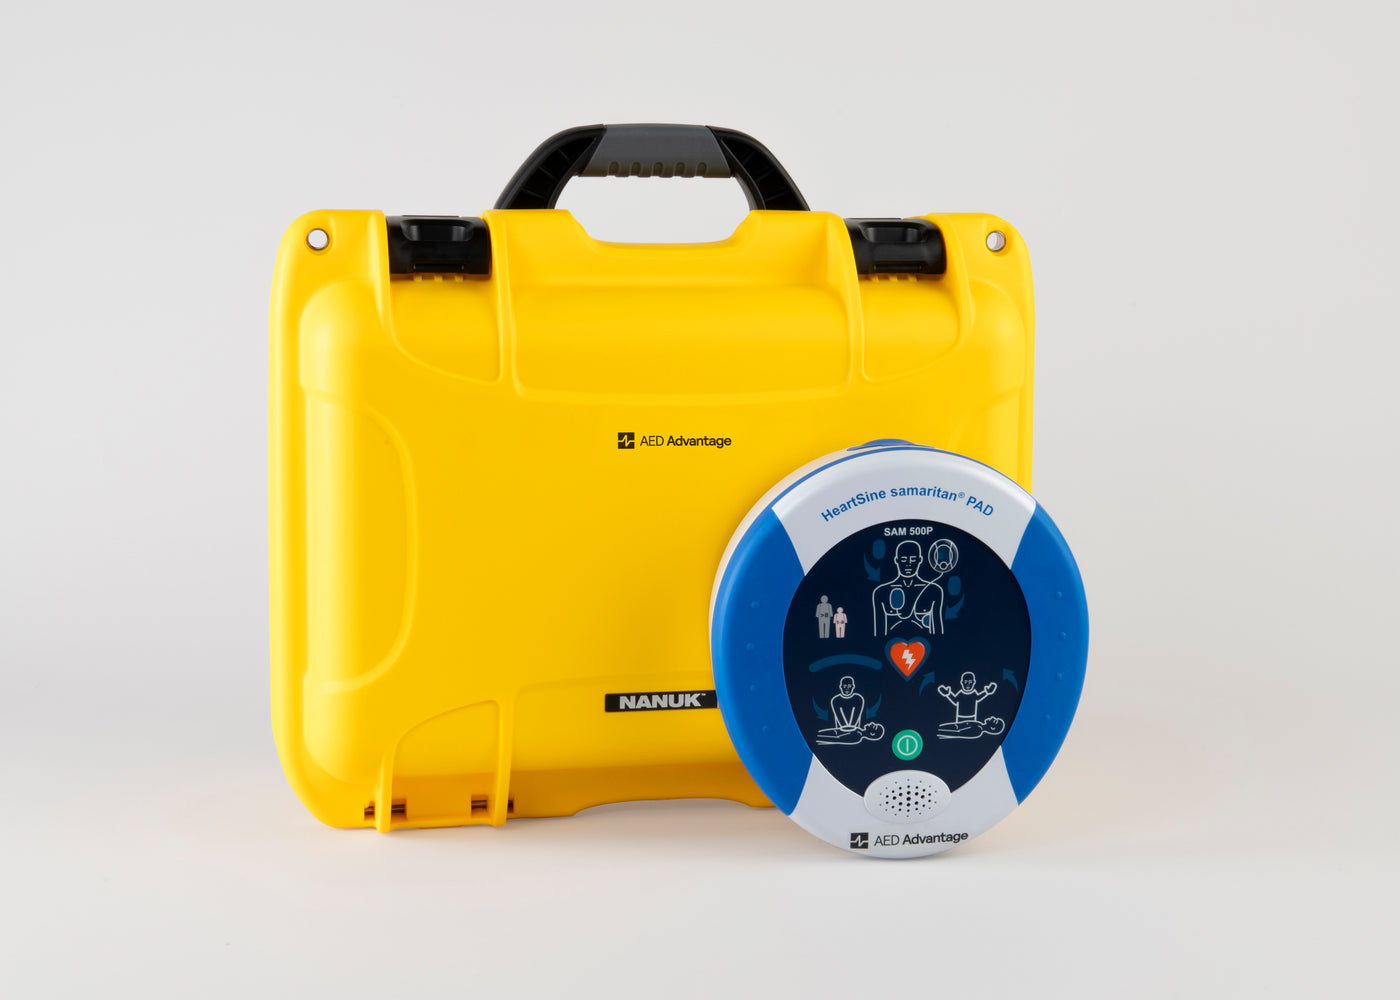 A blue and gray HeartSine 500P AED standing next to a bright yellow hardshell carry case